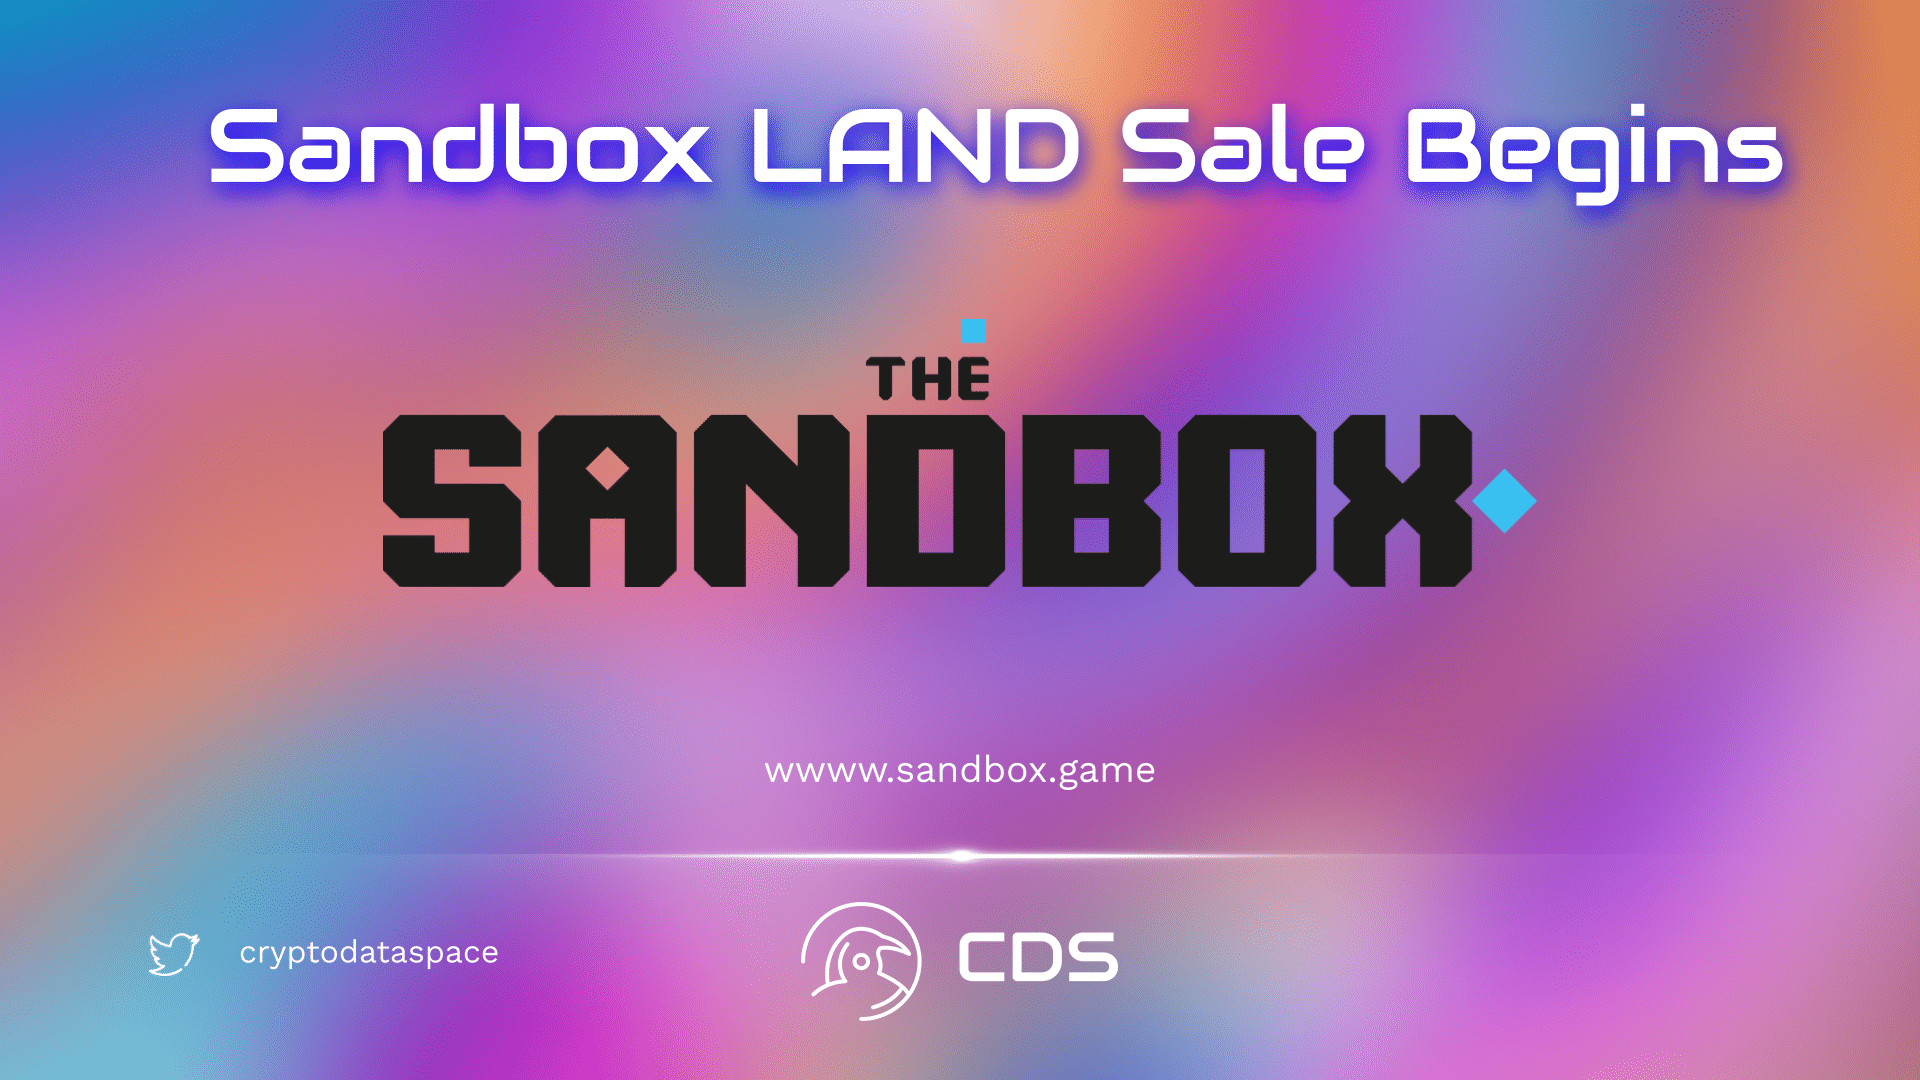 Playboy, Tony Hawk, and Snoop Dogg to Launch LAND Sale in Ethereum Metaverse Game the Sandbox